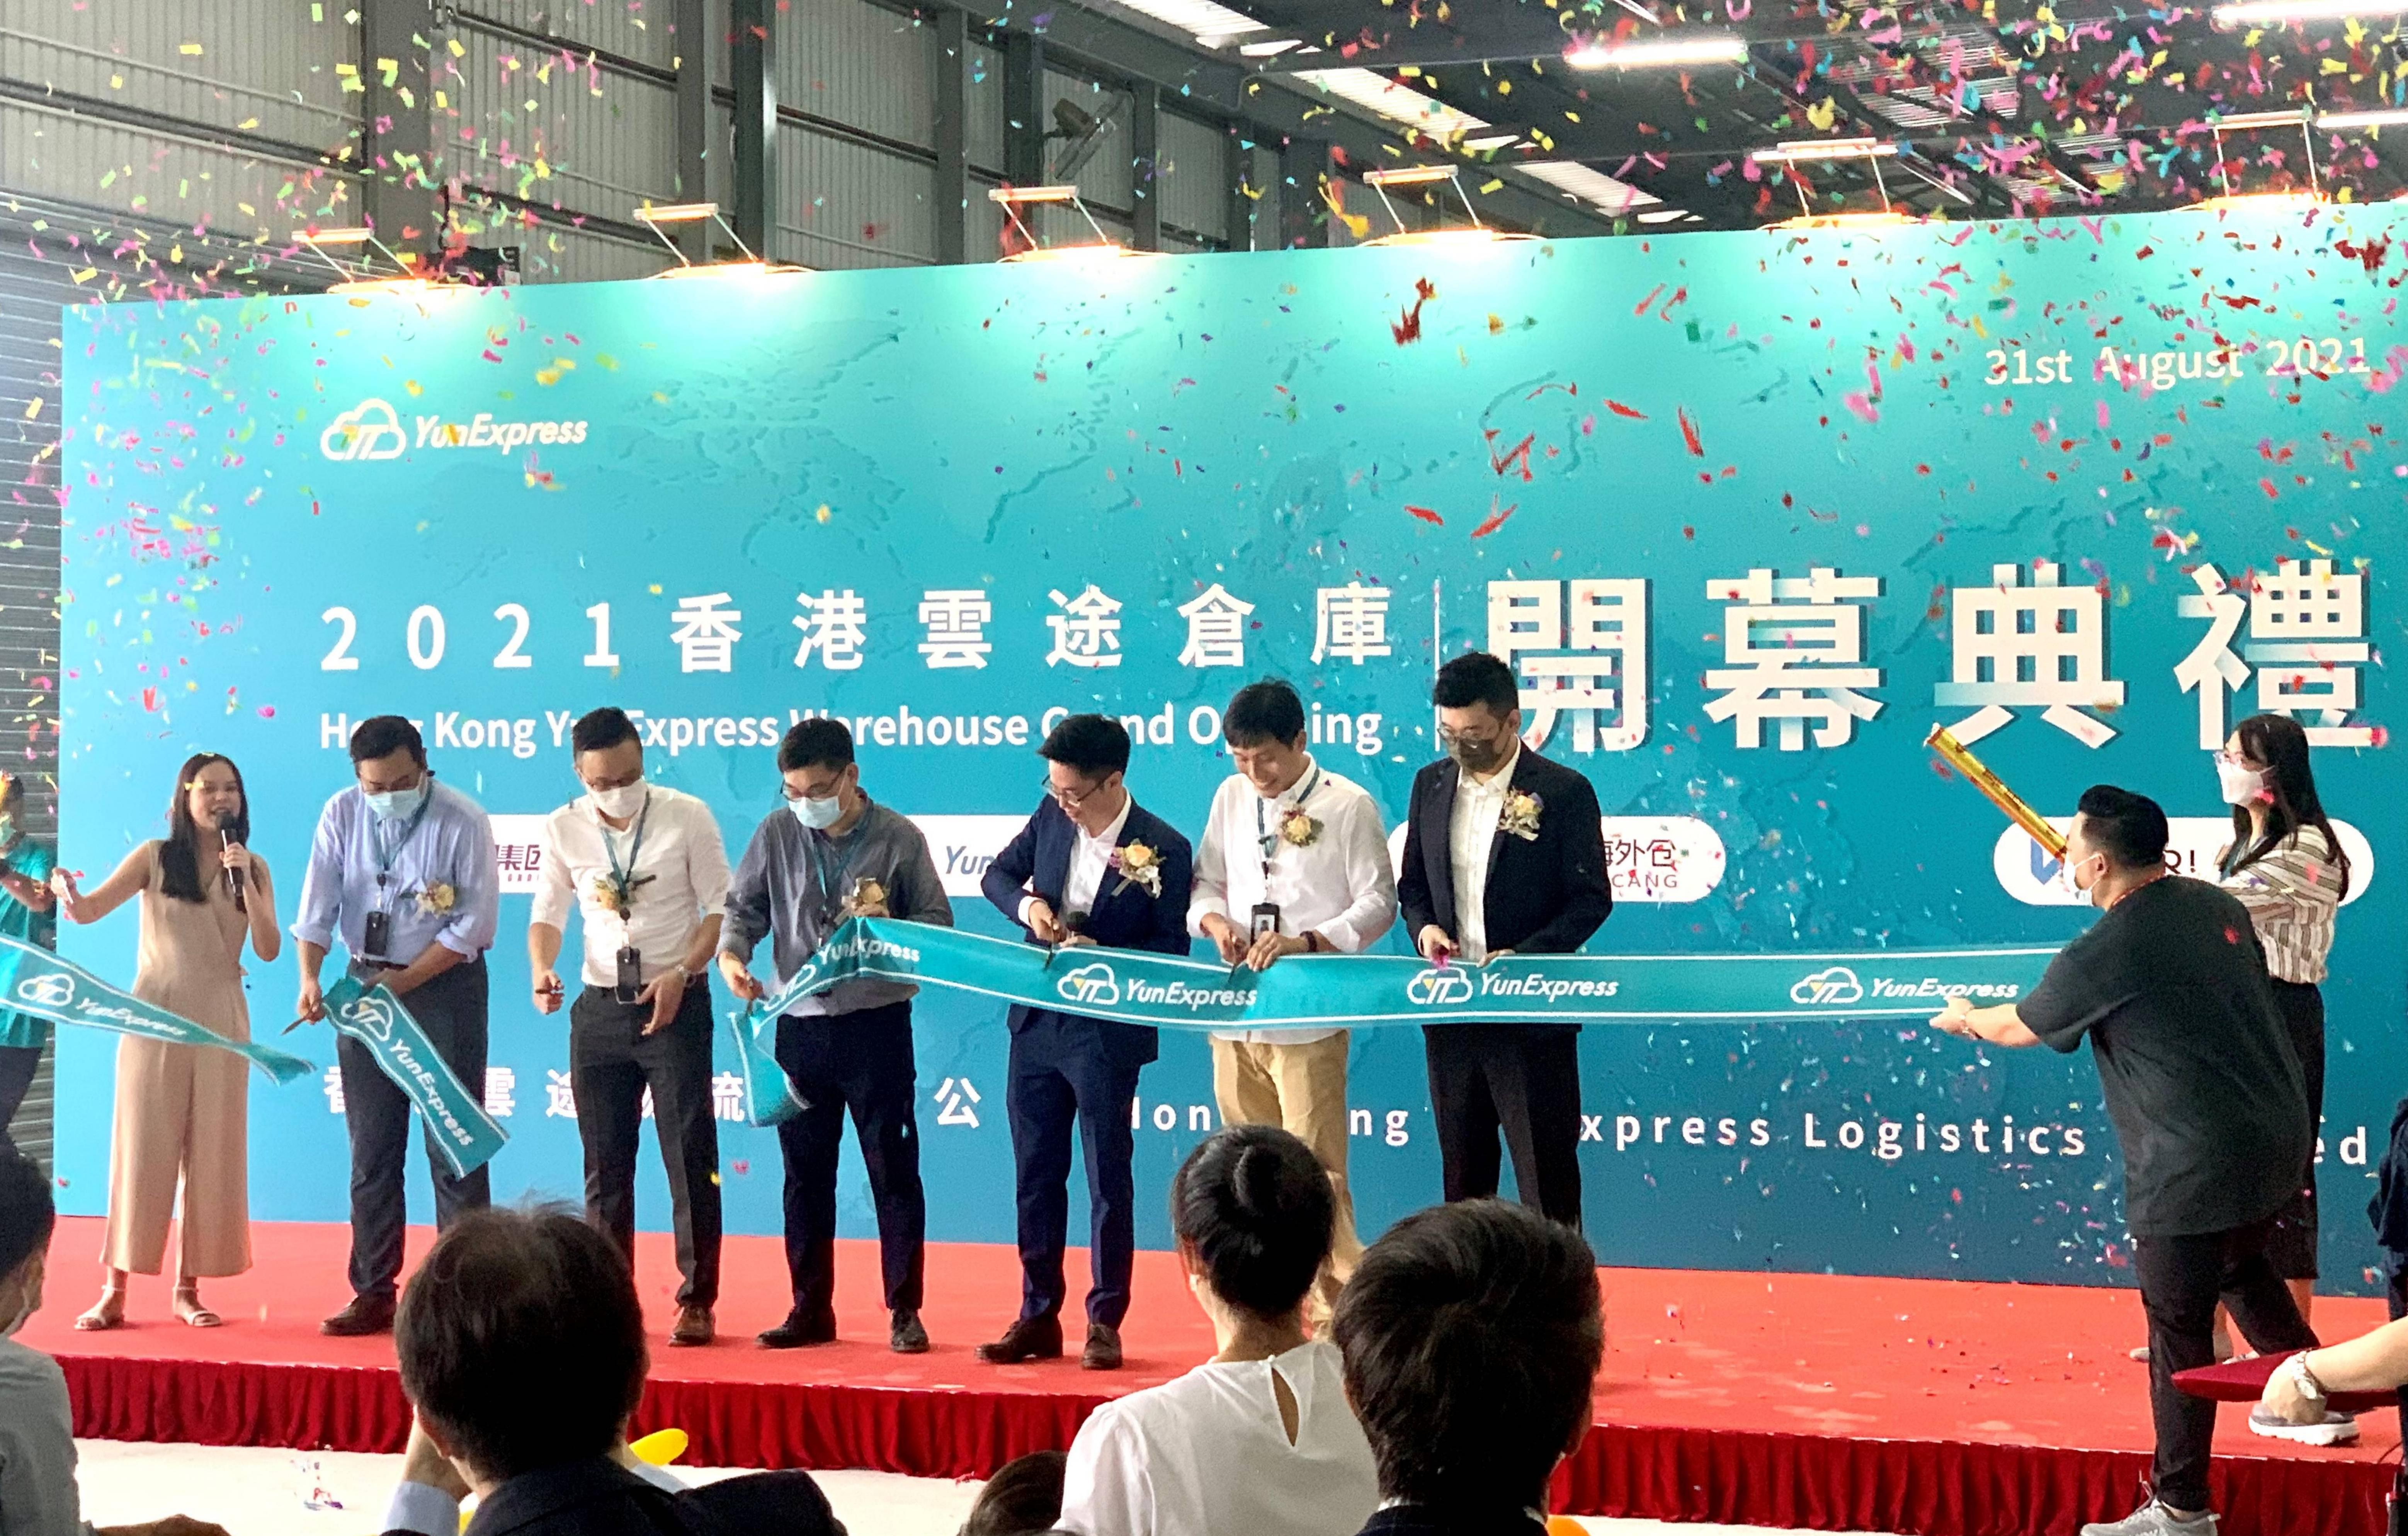 The Grand Opening Ceremony of YunExpress Asia Pacific Hub was Held in Hong Kong